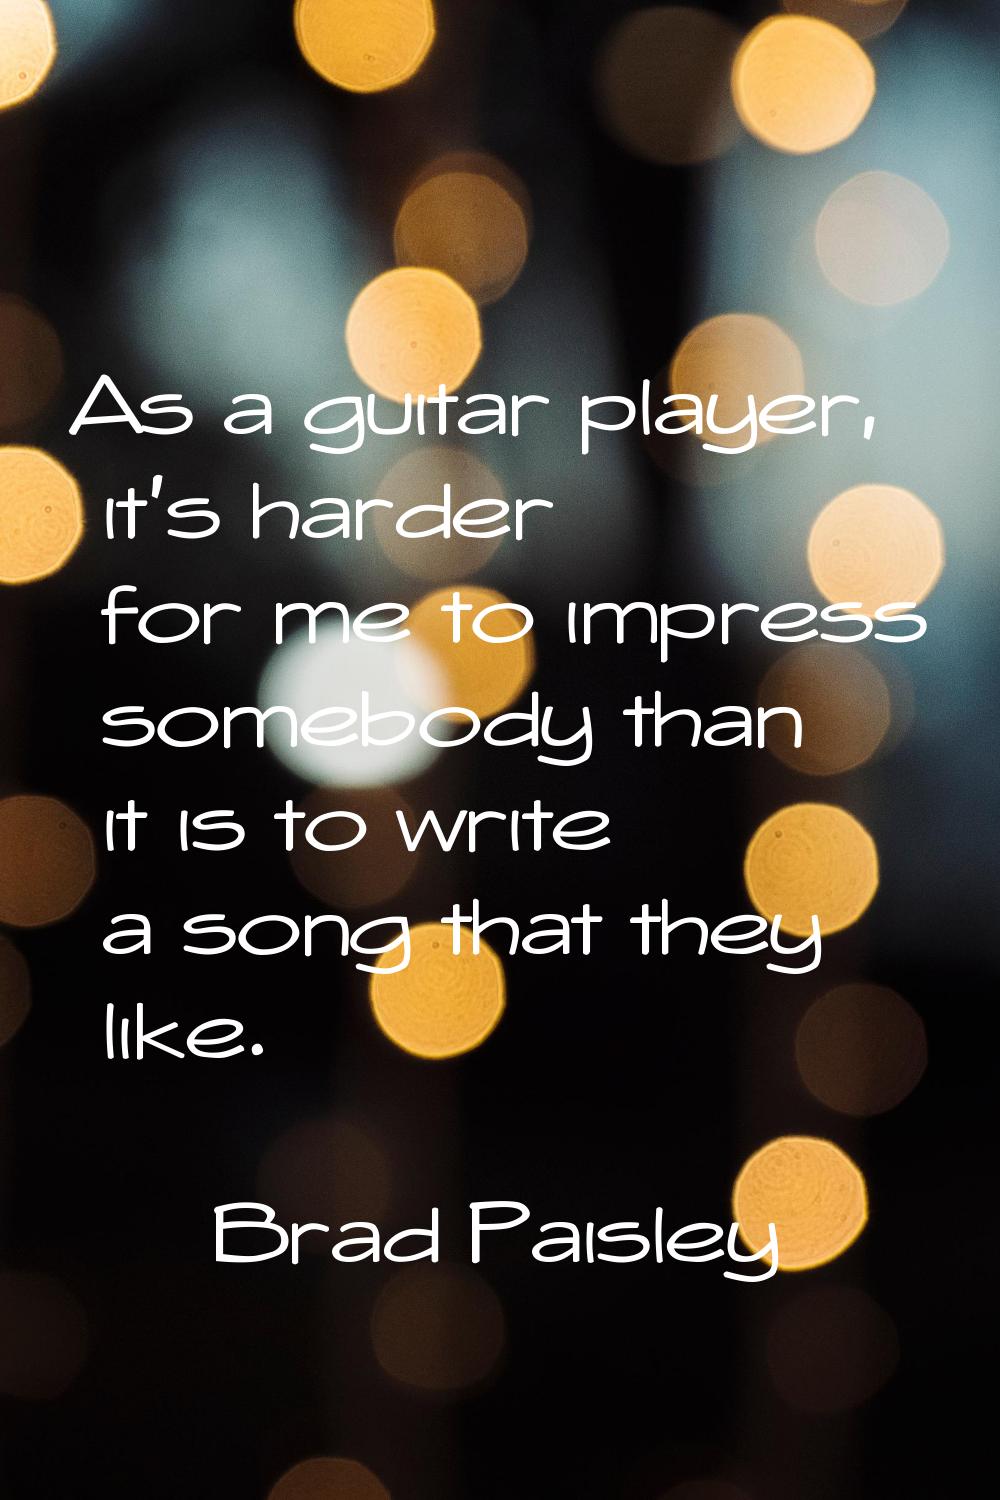 As a guitar player, it's harder for me to impress somebody than it is to write a song that they lik